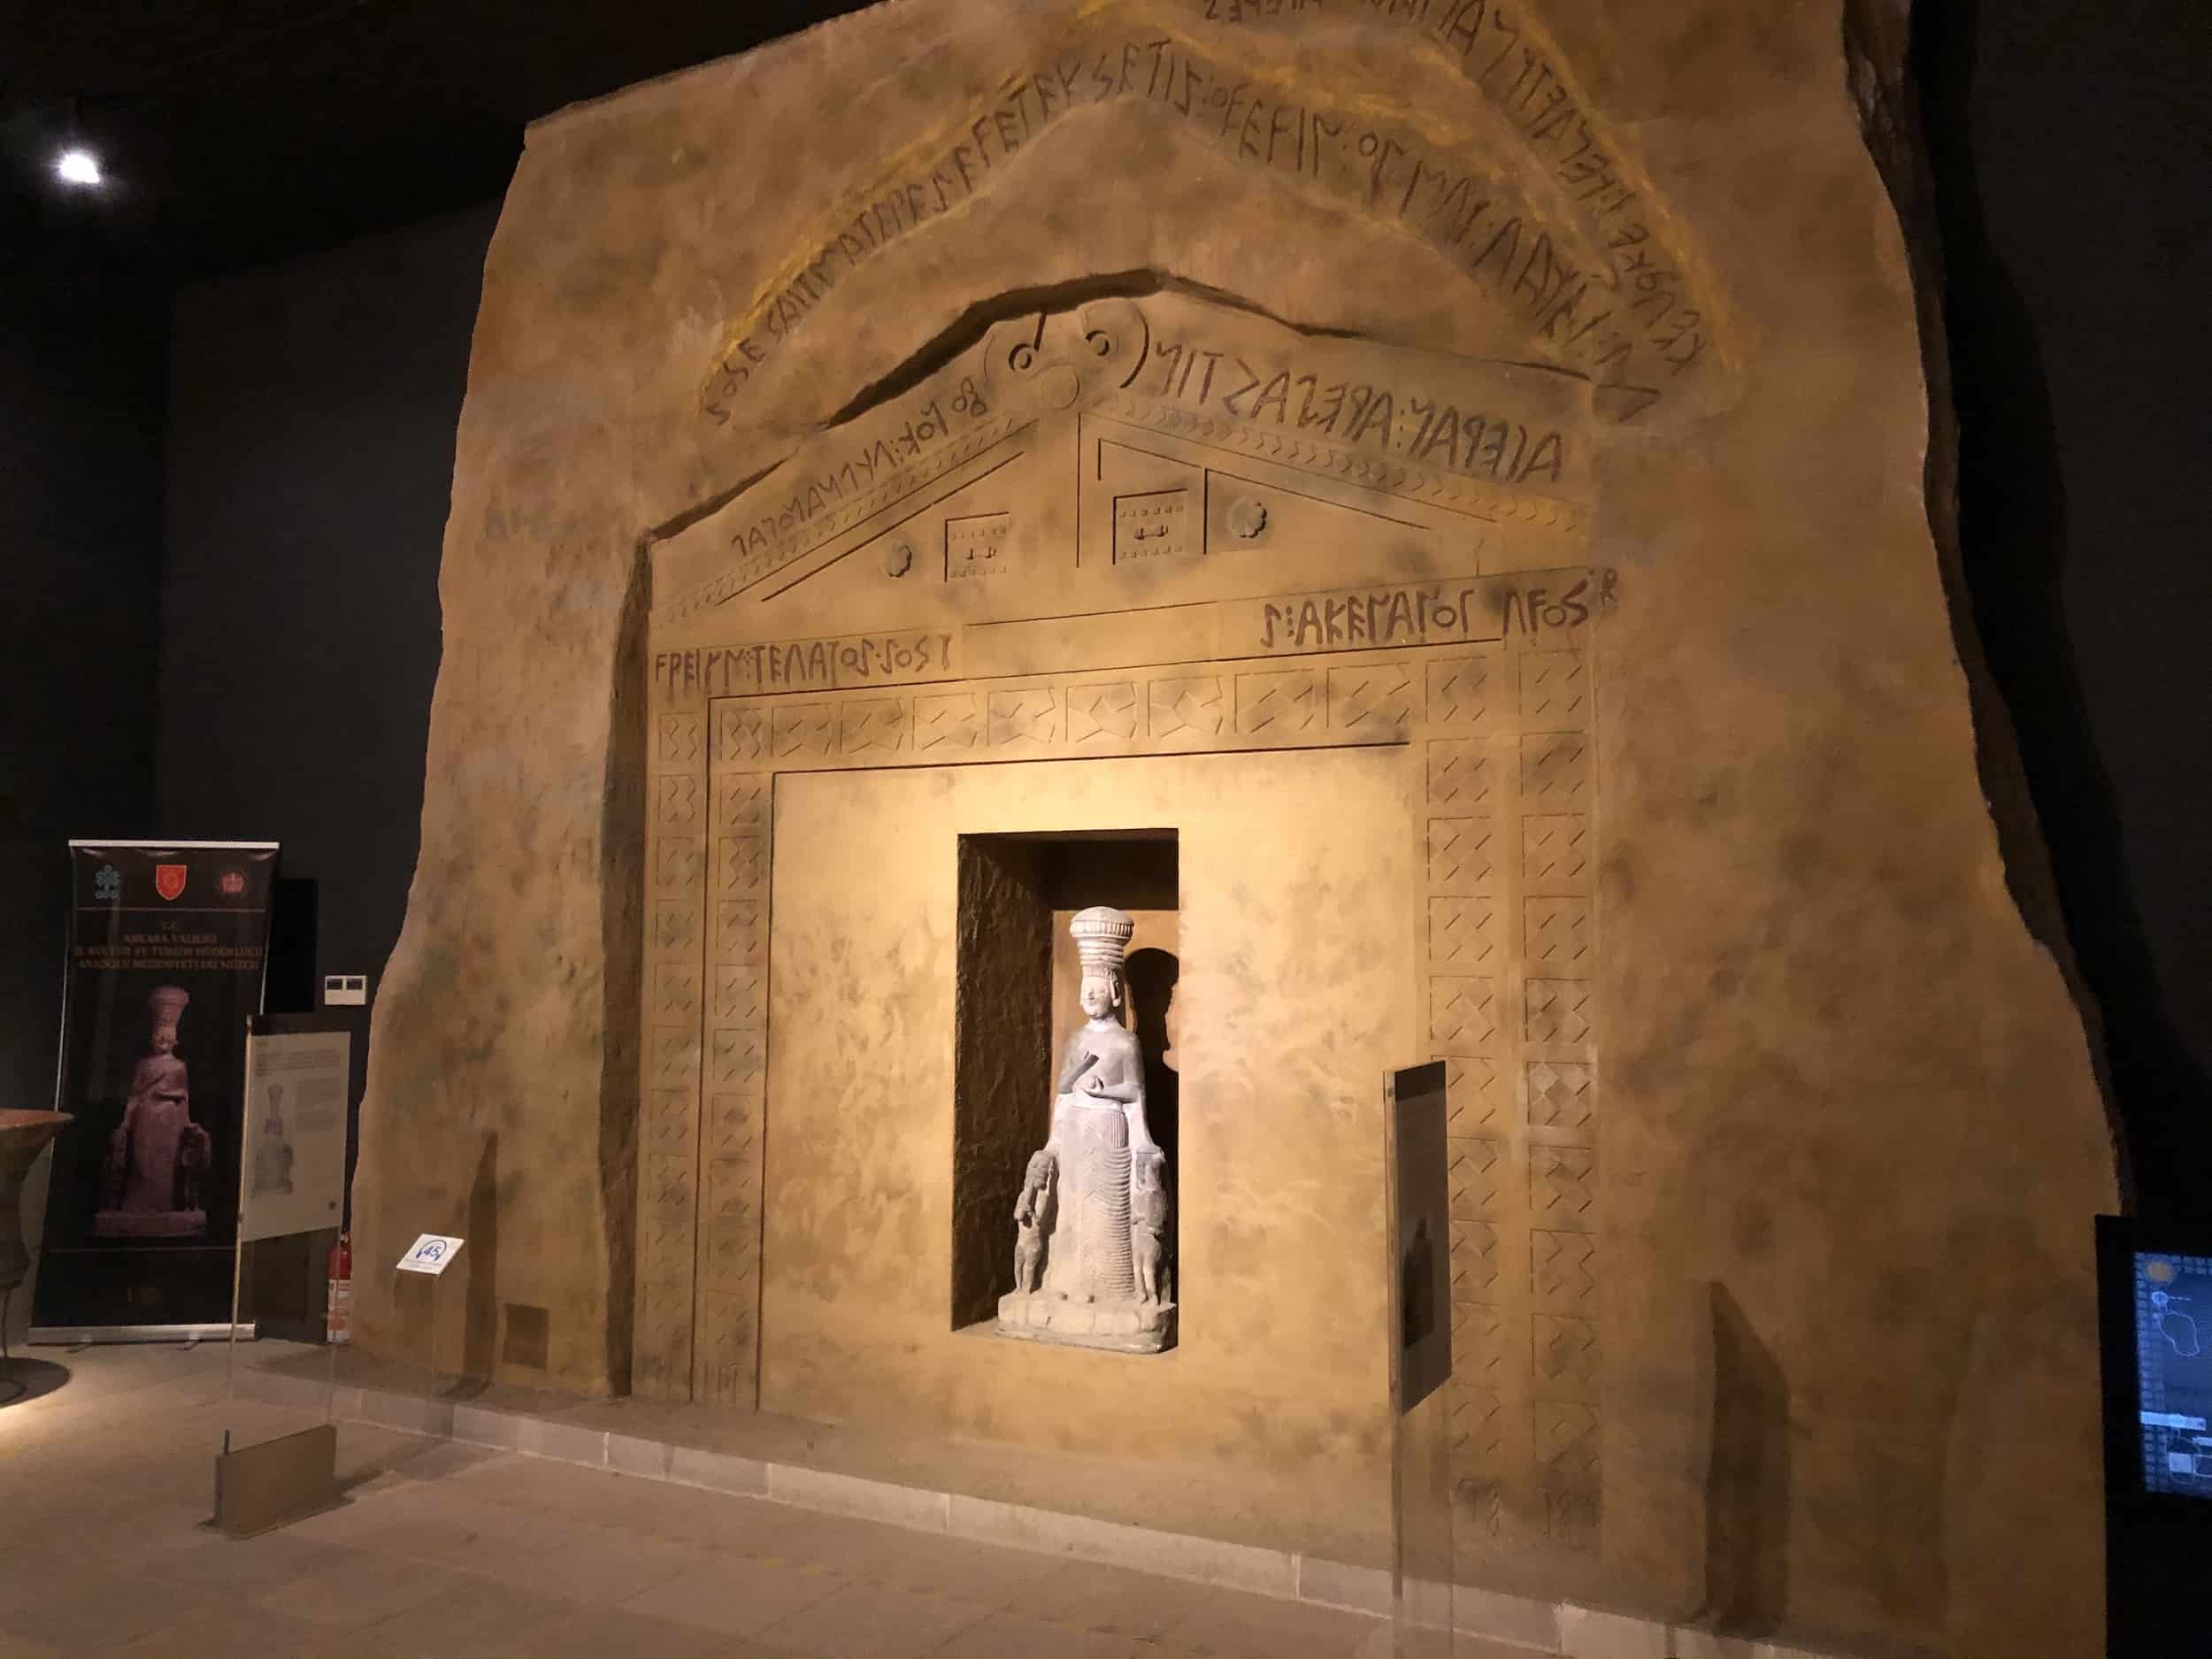 Replica of the Midas Monument at the Museum of Anatolian Civilizations in Ankara, Turkey